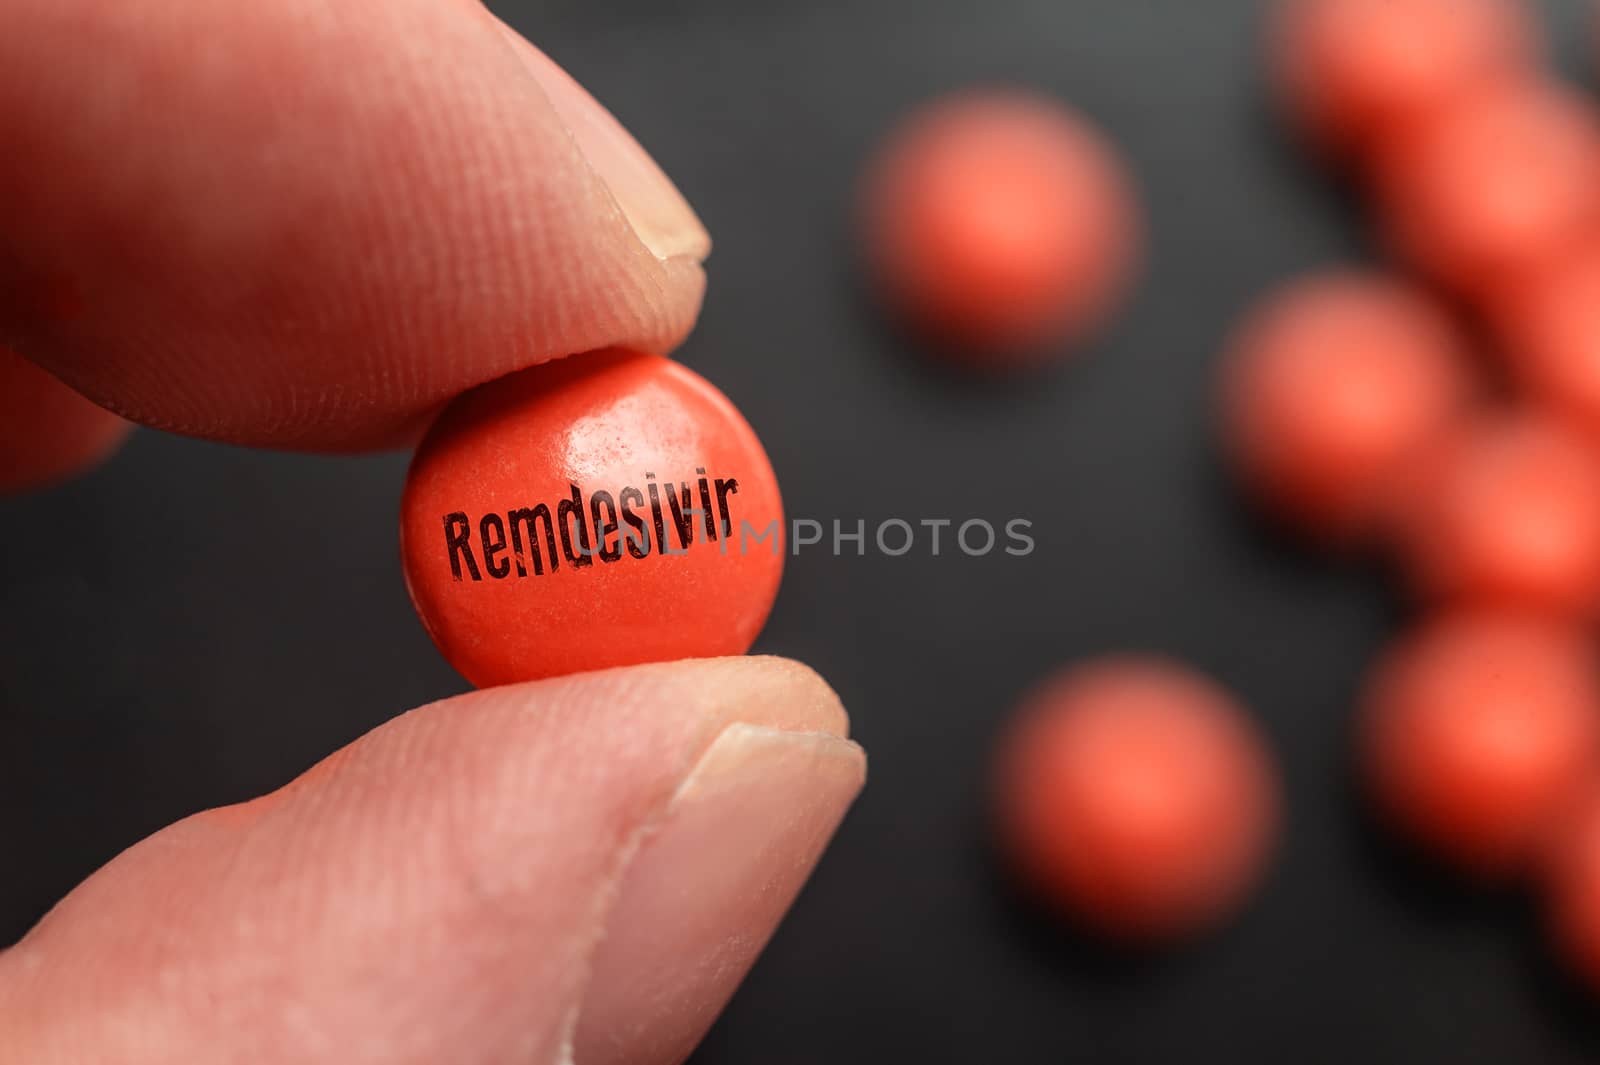 Artistic rendering of a Remdesivir pill by mbruxelle